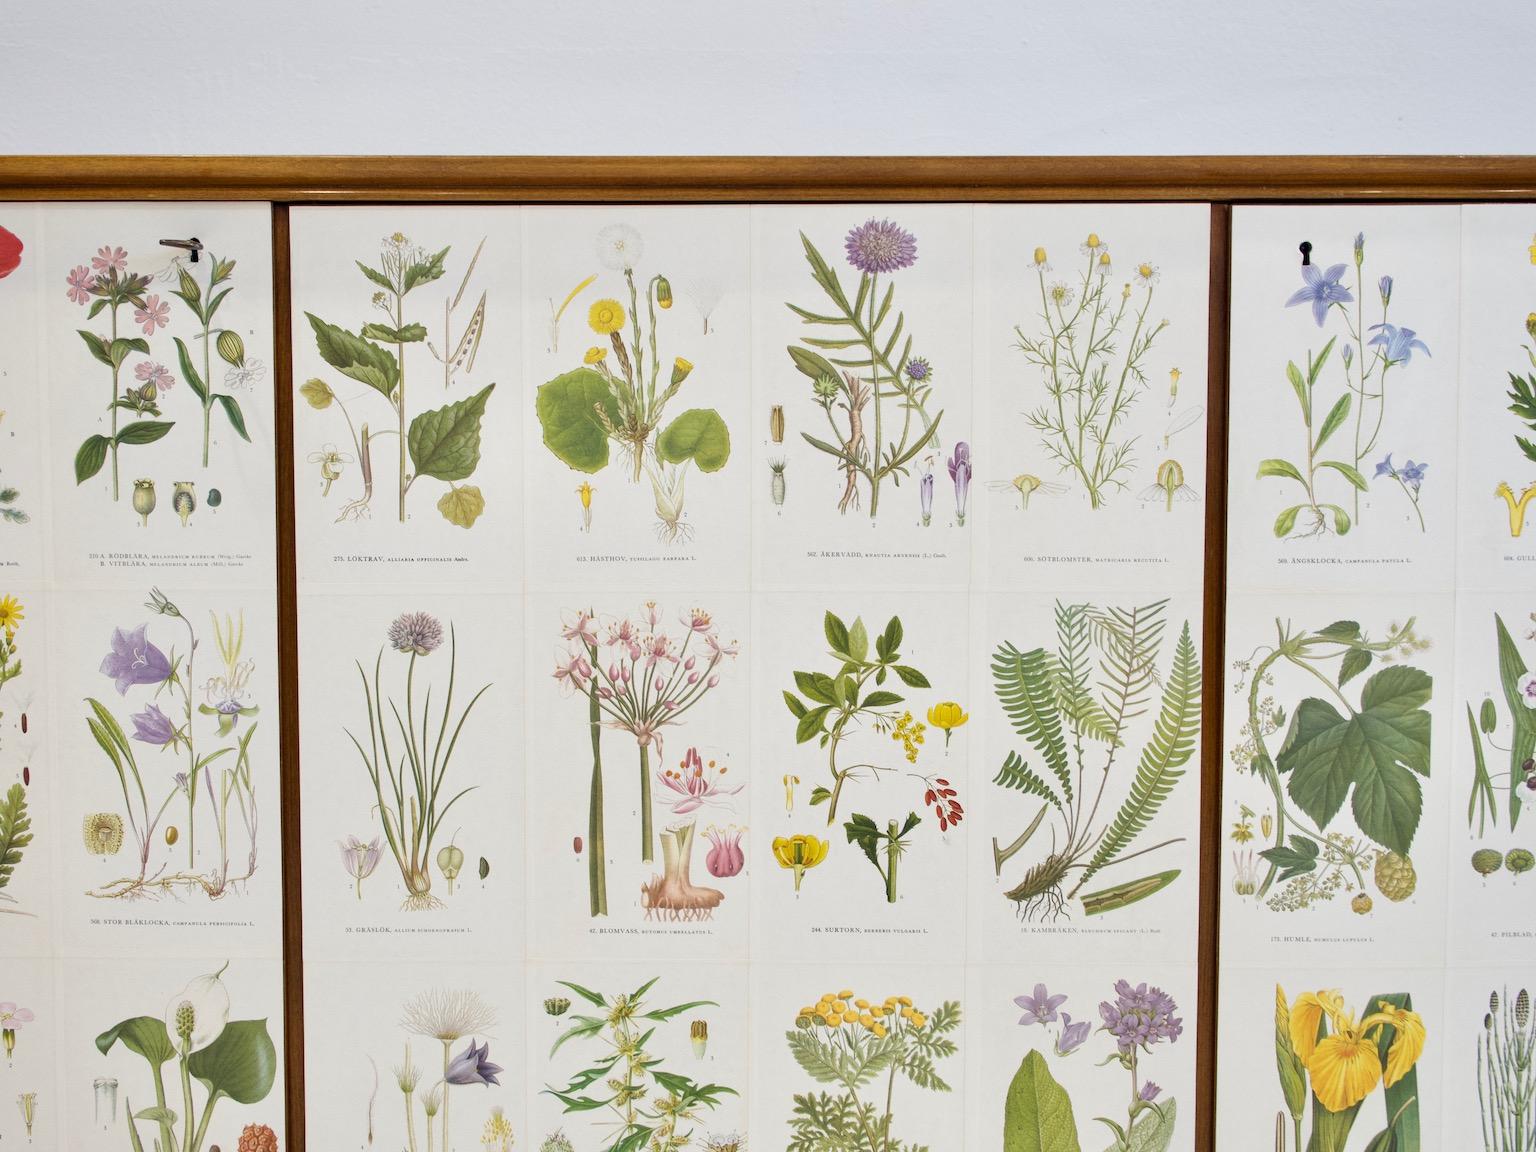 Mid-20th Century Cabinet with Nordens Flora Illustrations by C. Lindman 9